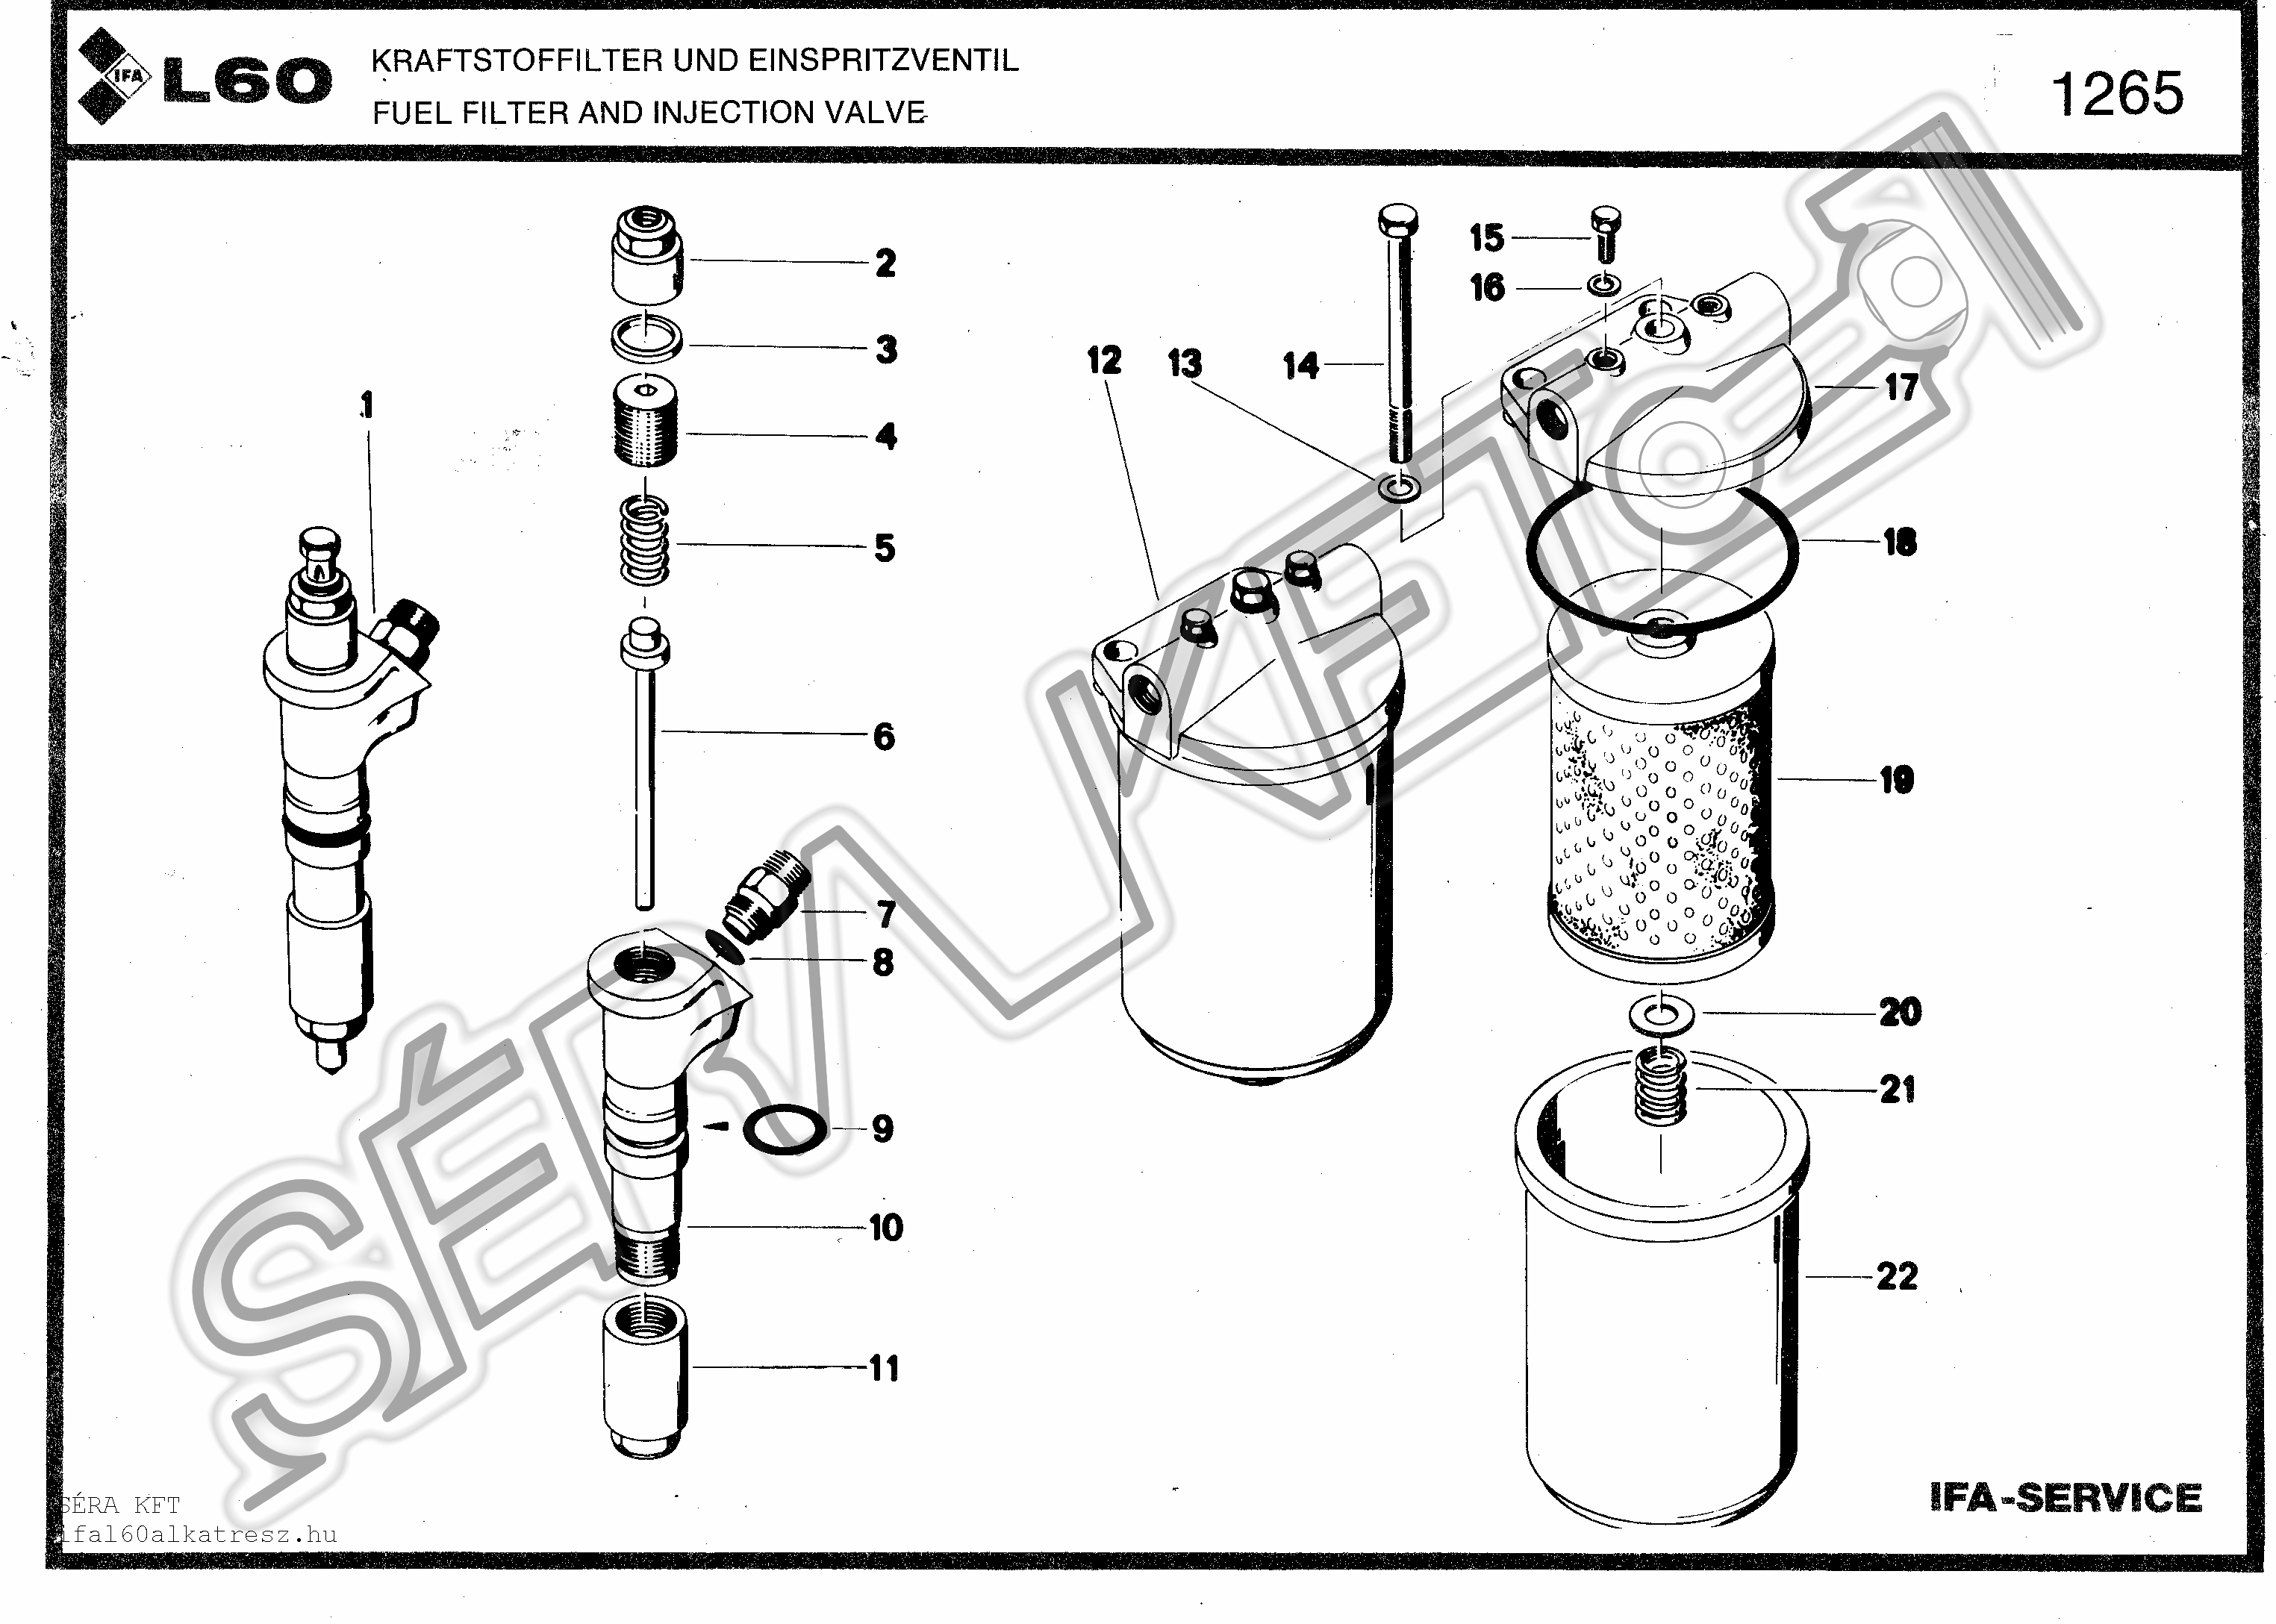 Fuel filter and injection valve